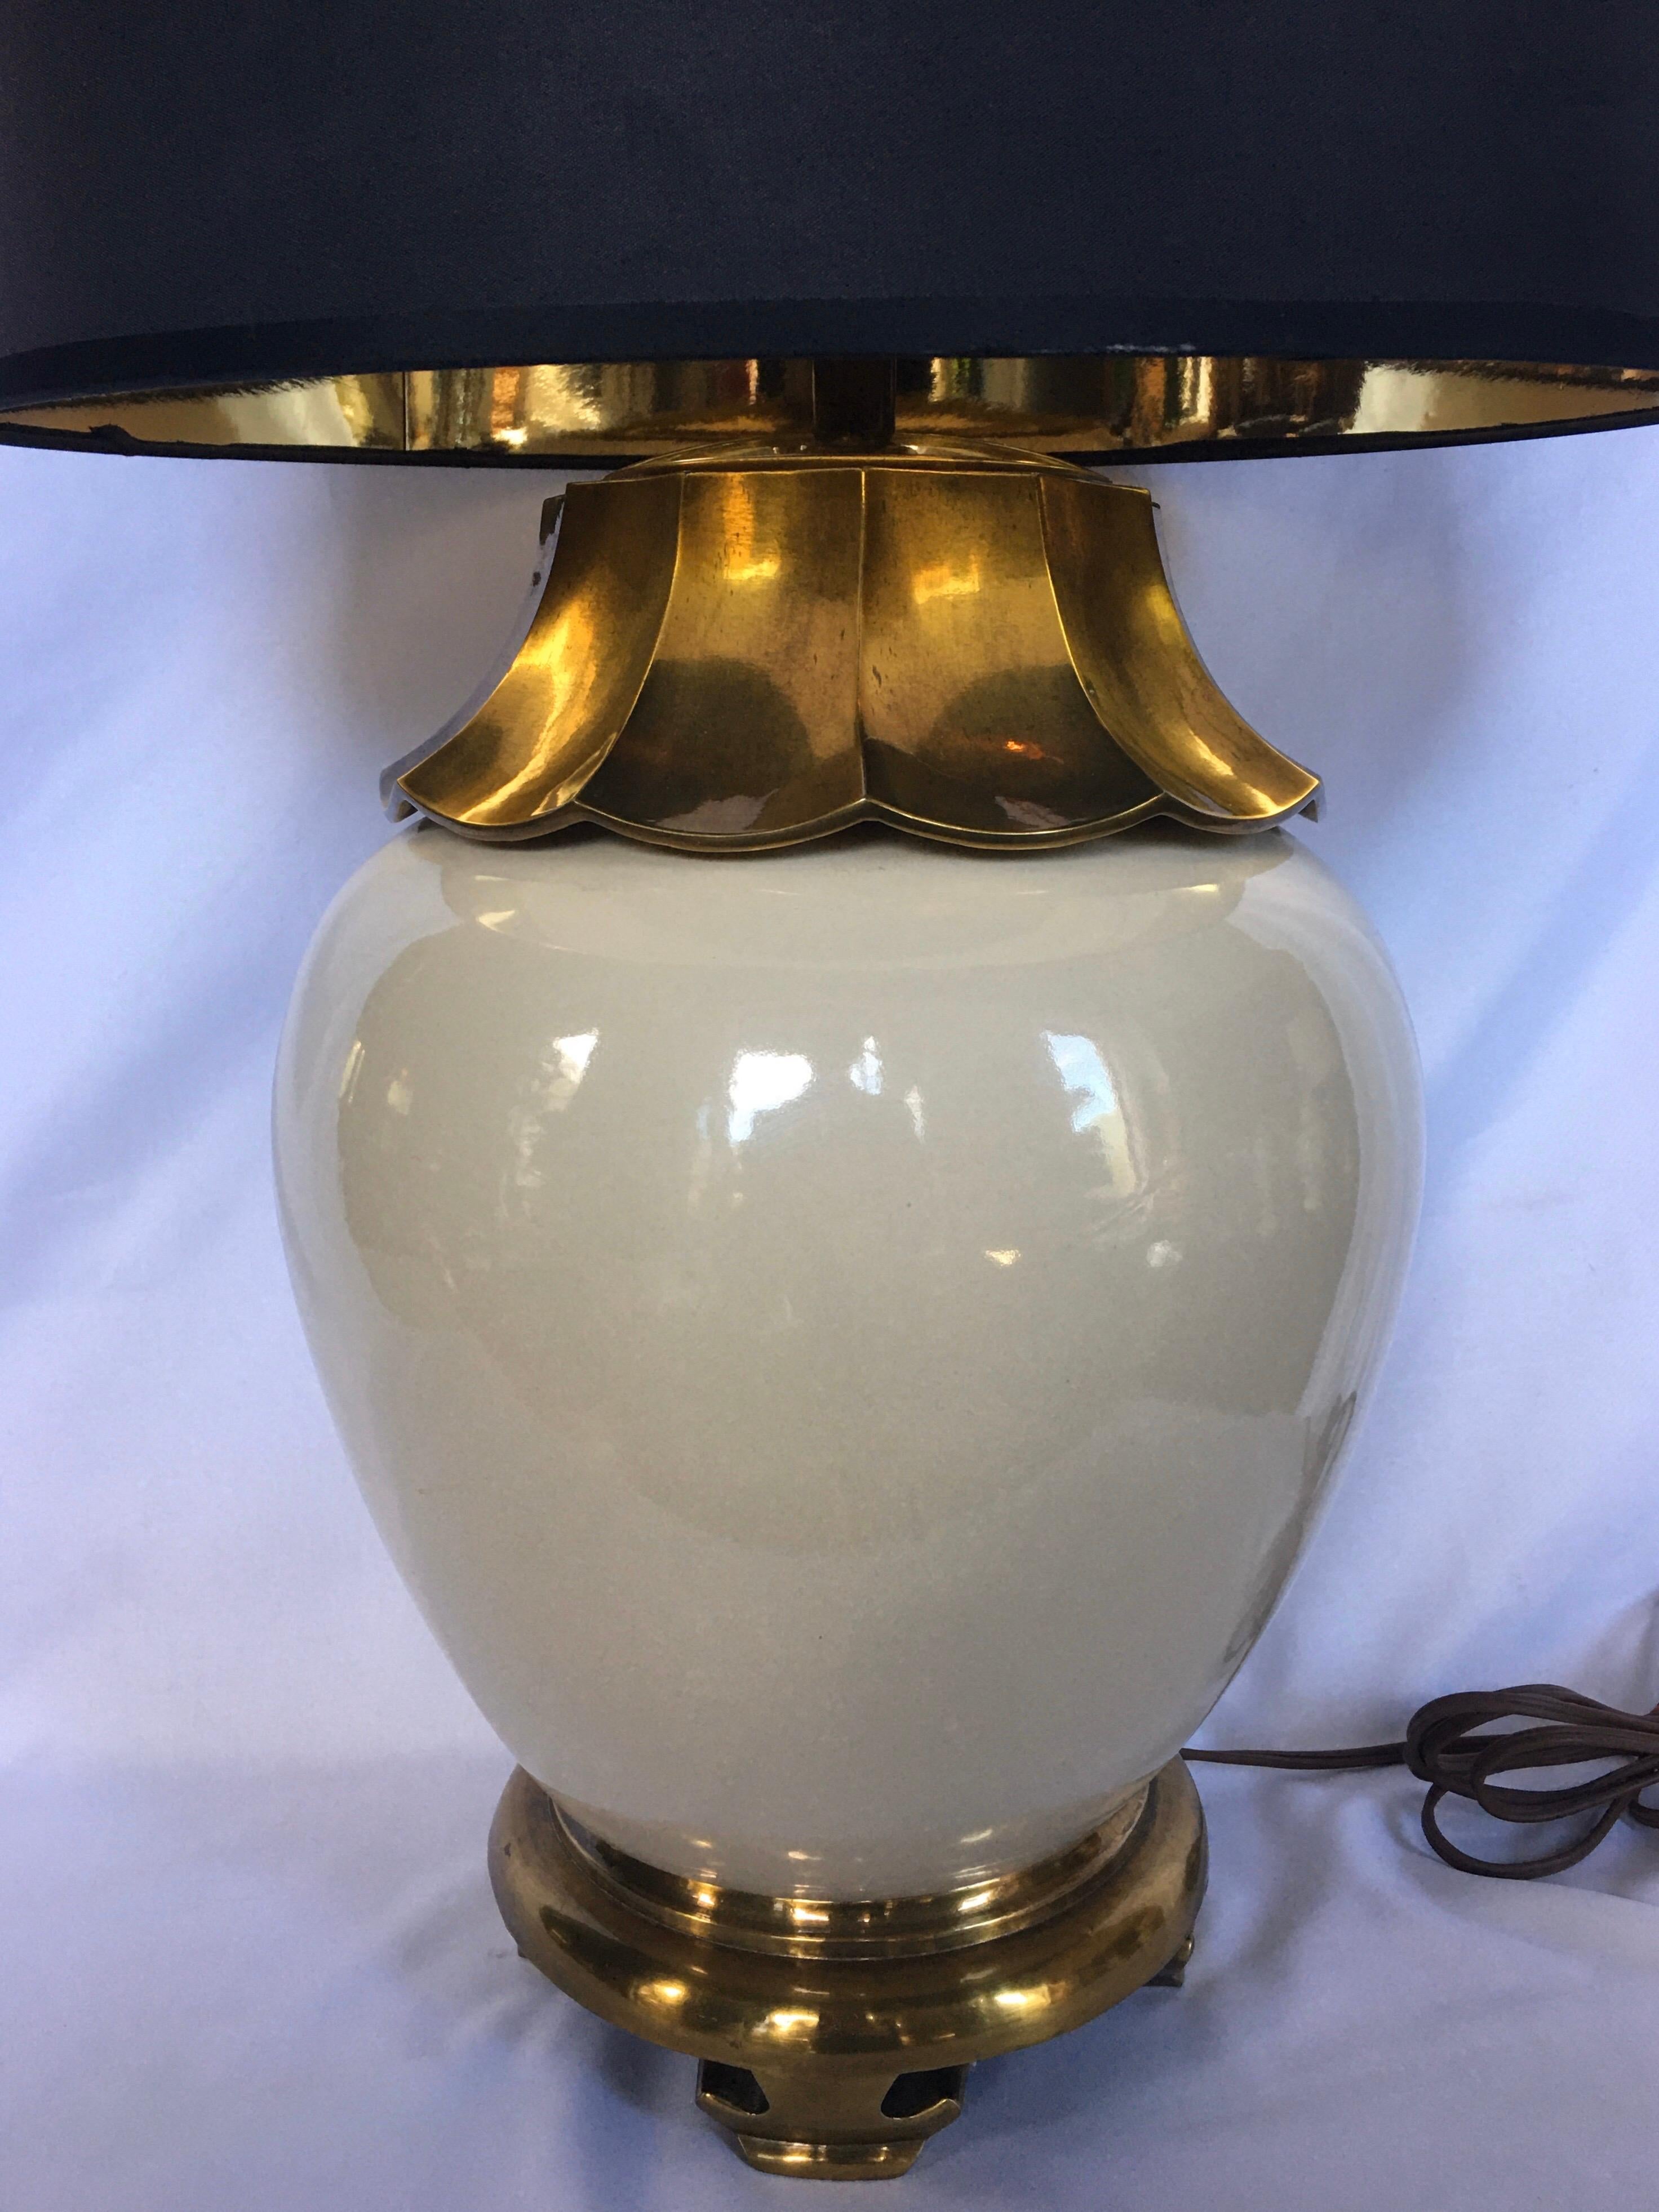 Asian inspired metal and brass table lamp by Chapman. Metal body features a cream gloss finish with a brass fluted pagoda shaped top and brass oriental style bases. Harp and brass finial included. Marked 